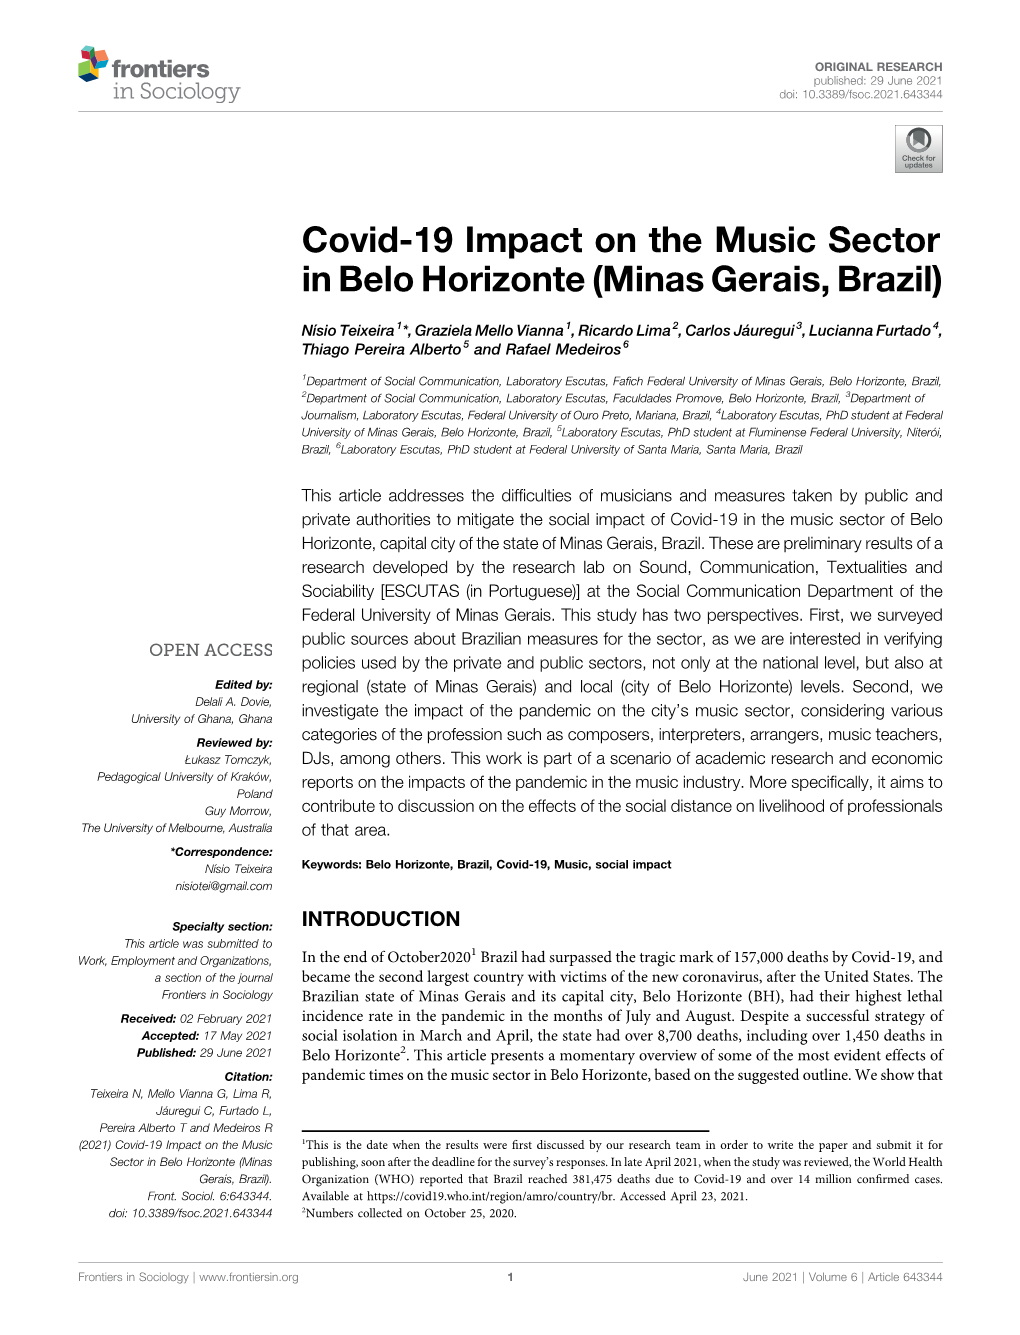 Covid-19 Impact on the Music Sector in Belo Horizonte (Minas Gerais, Brazil)